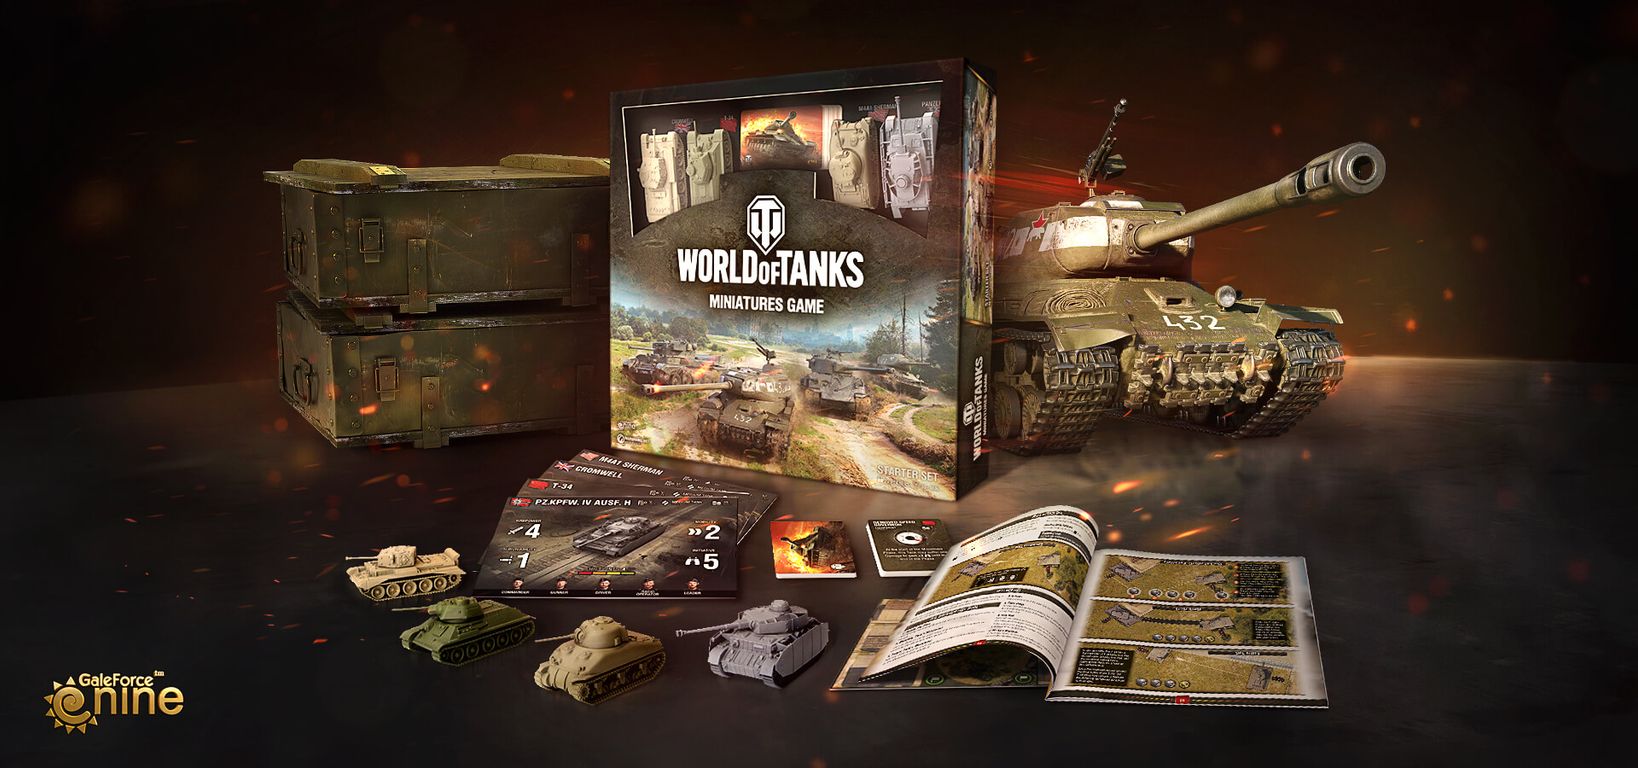 World of Tanks: Miniatures Game partes